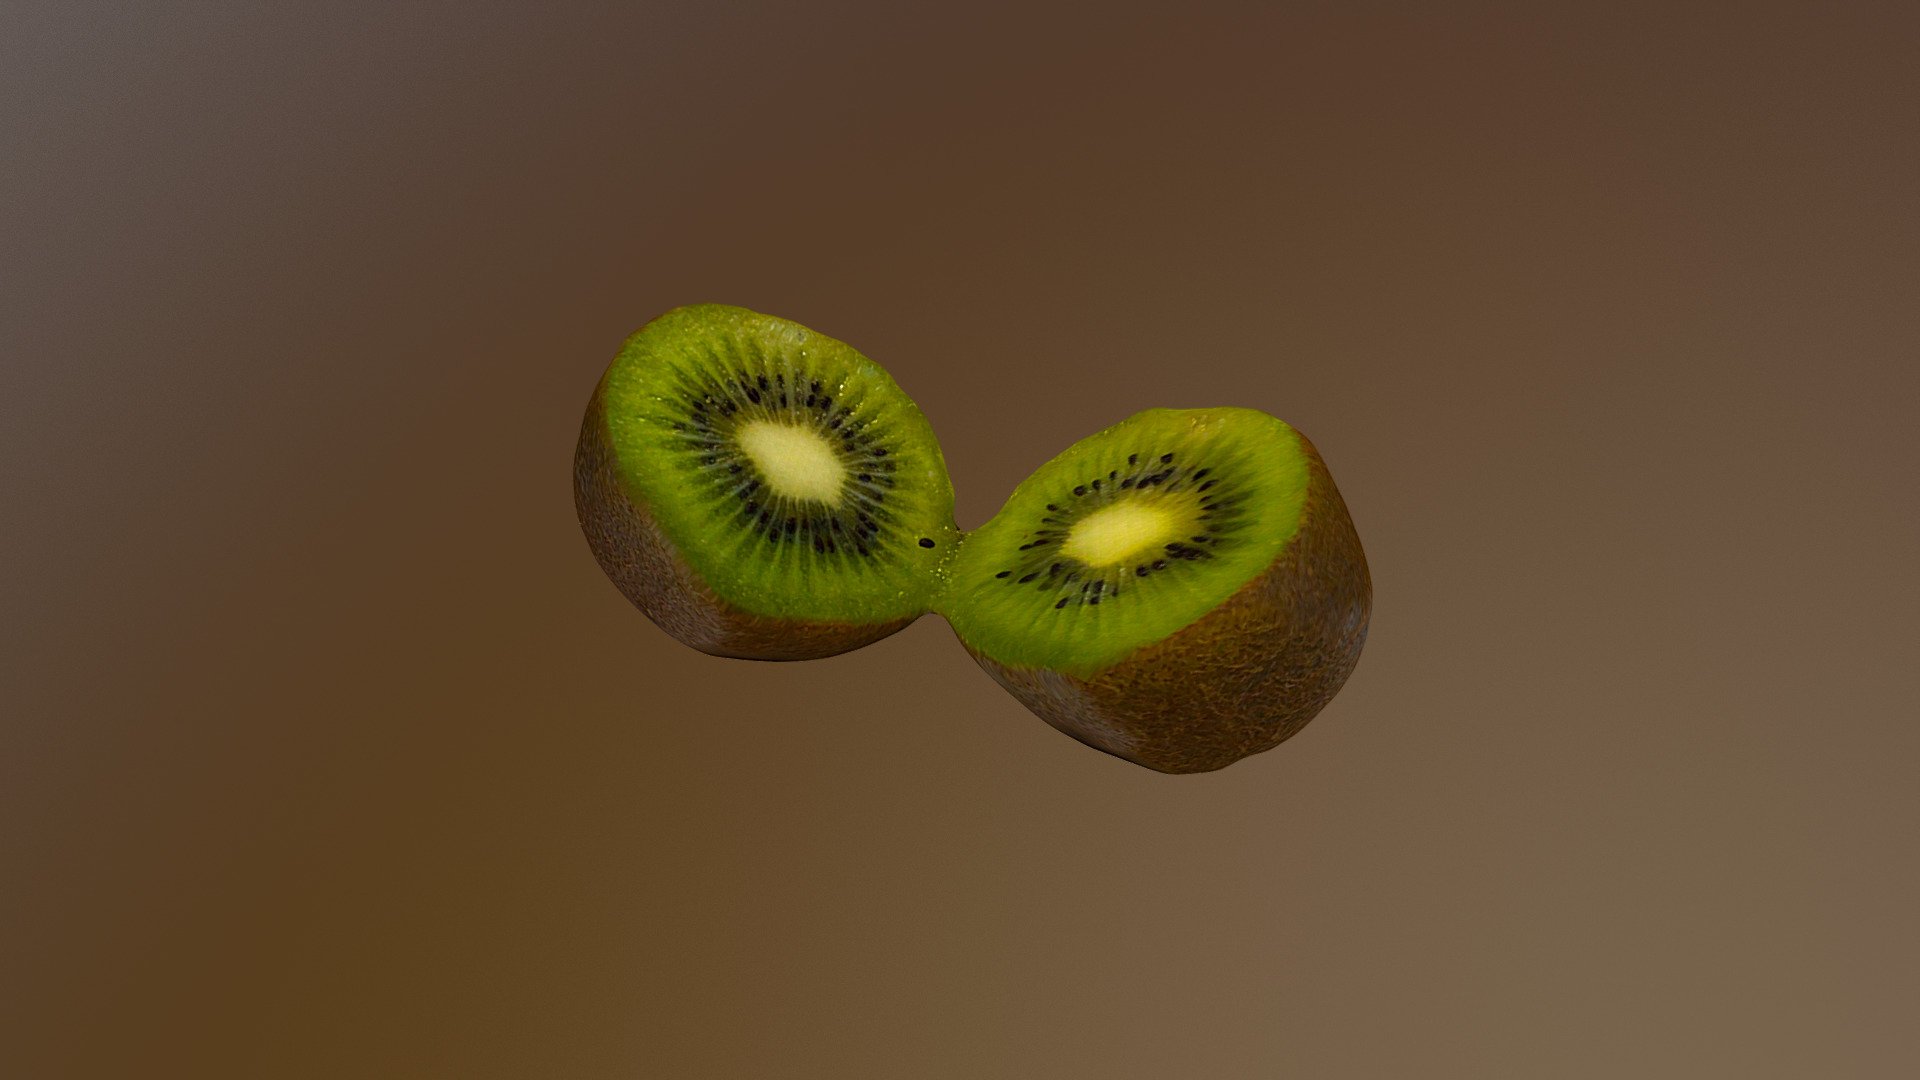 People often associate the kiwi with New Zealand but it actually originated from China and was first known as the “Chinese Gooseberry.” New Zealand was the first country to cultivate the fruit outside of China and named the fruit “kiwi” due to its resemblance to the brown, fuzzy kiwi bird 3d model